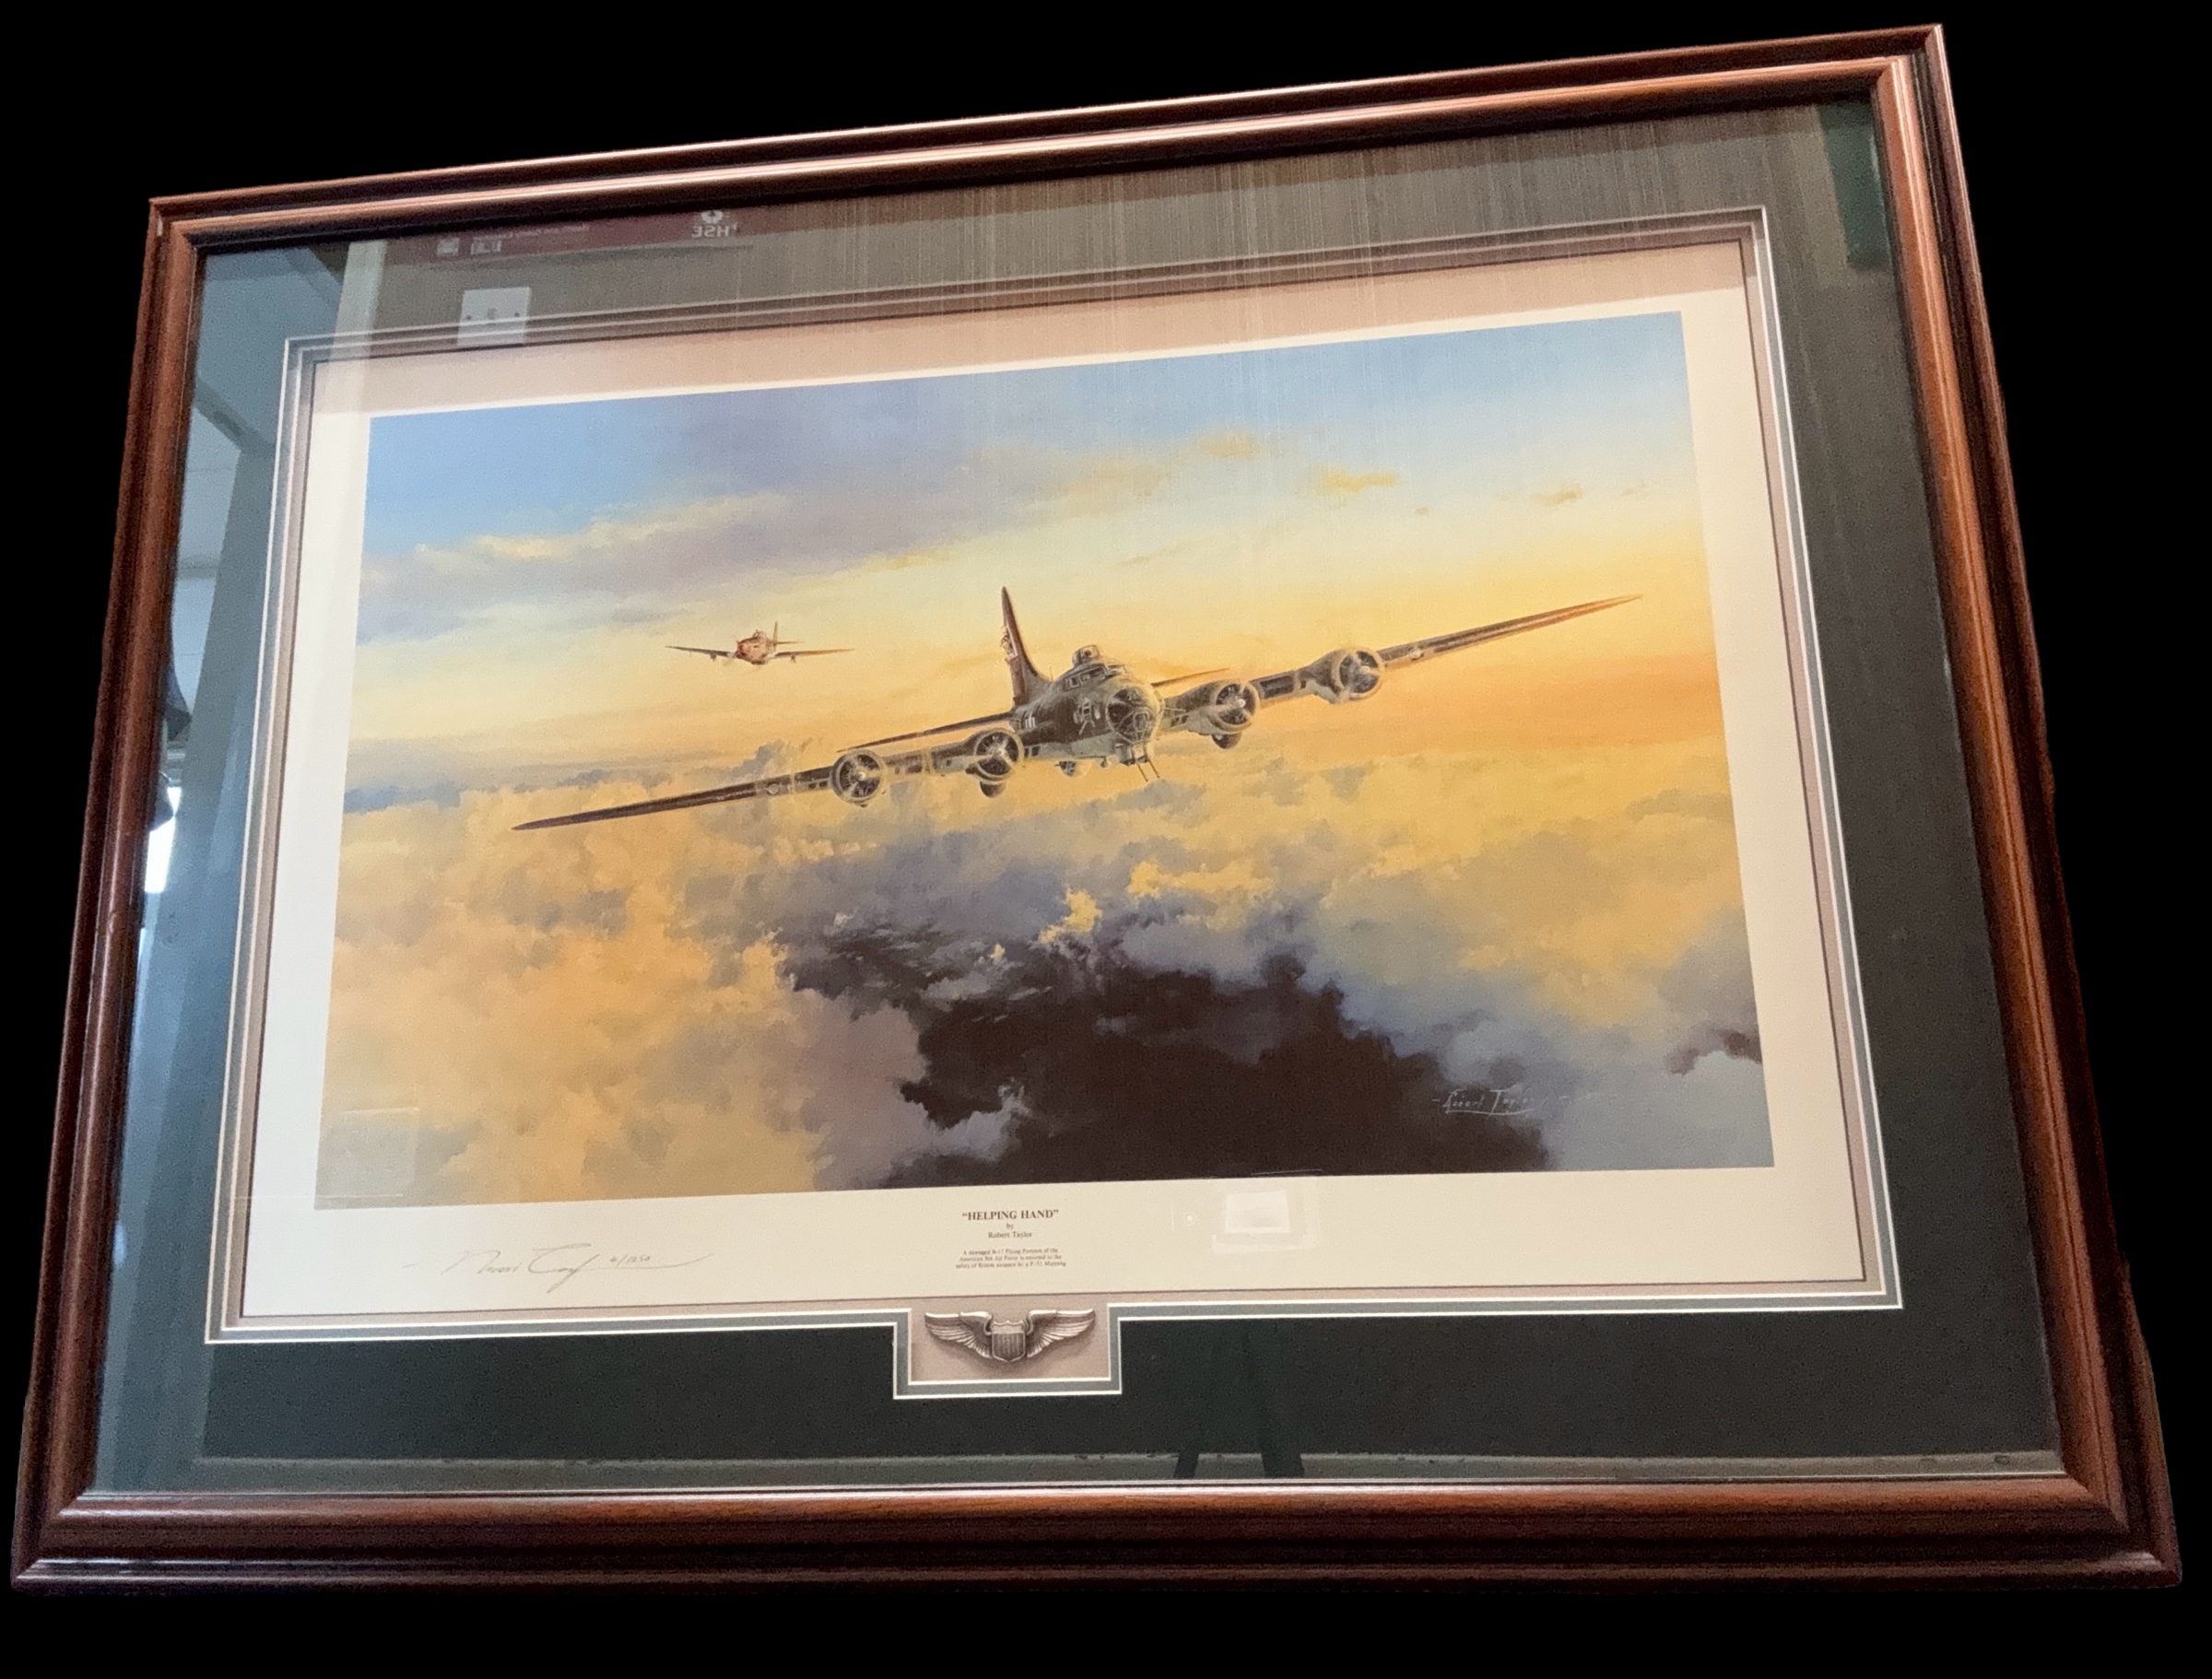 Helping Hand WWII 37x28 inch framed and mounted print limited edition 4/1250 signed in pencil by the - Image 3 of 3